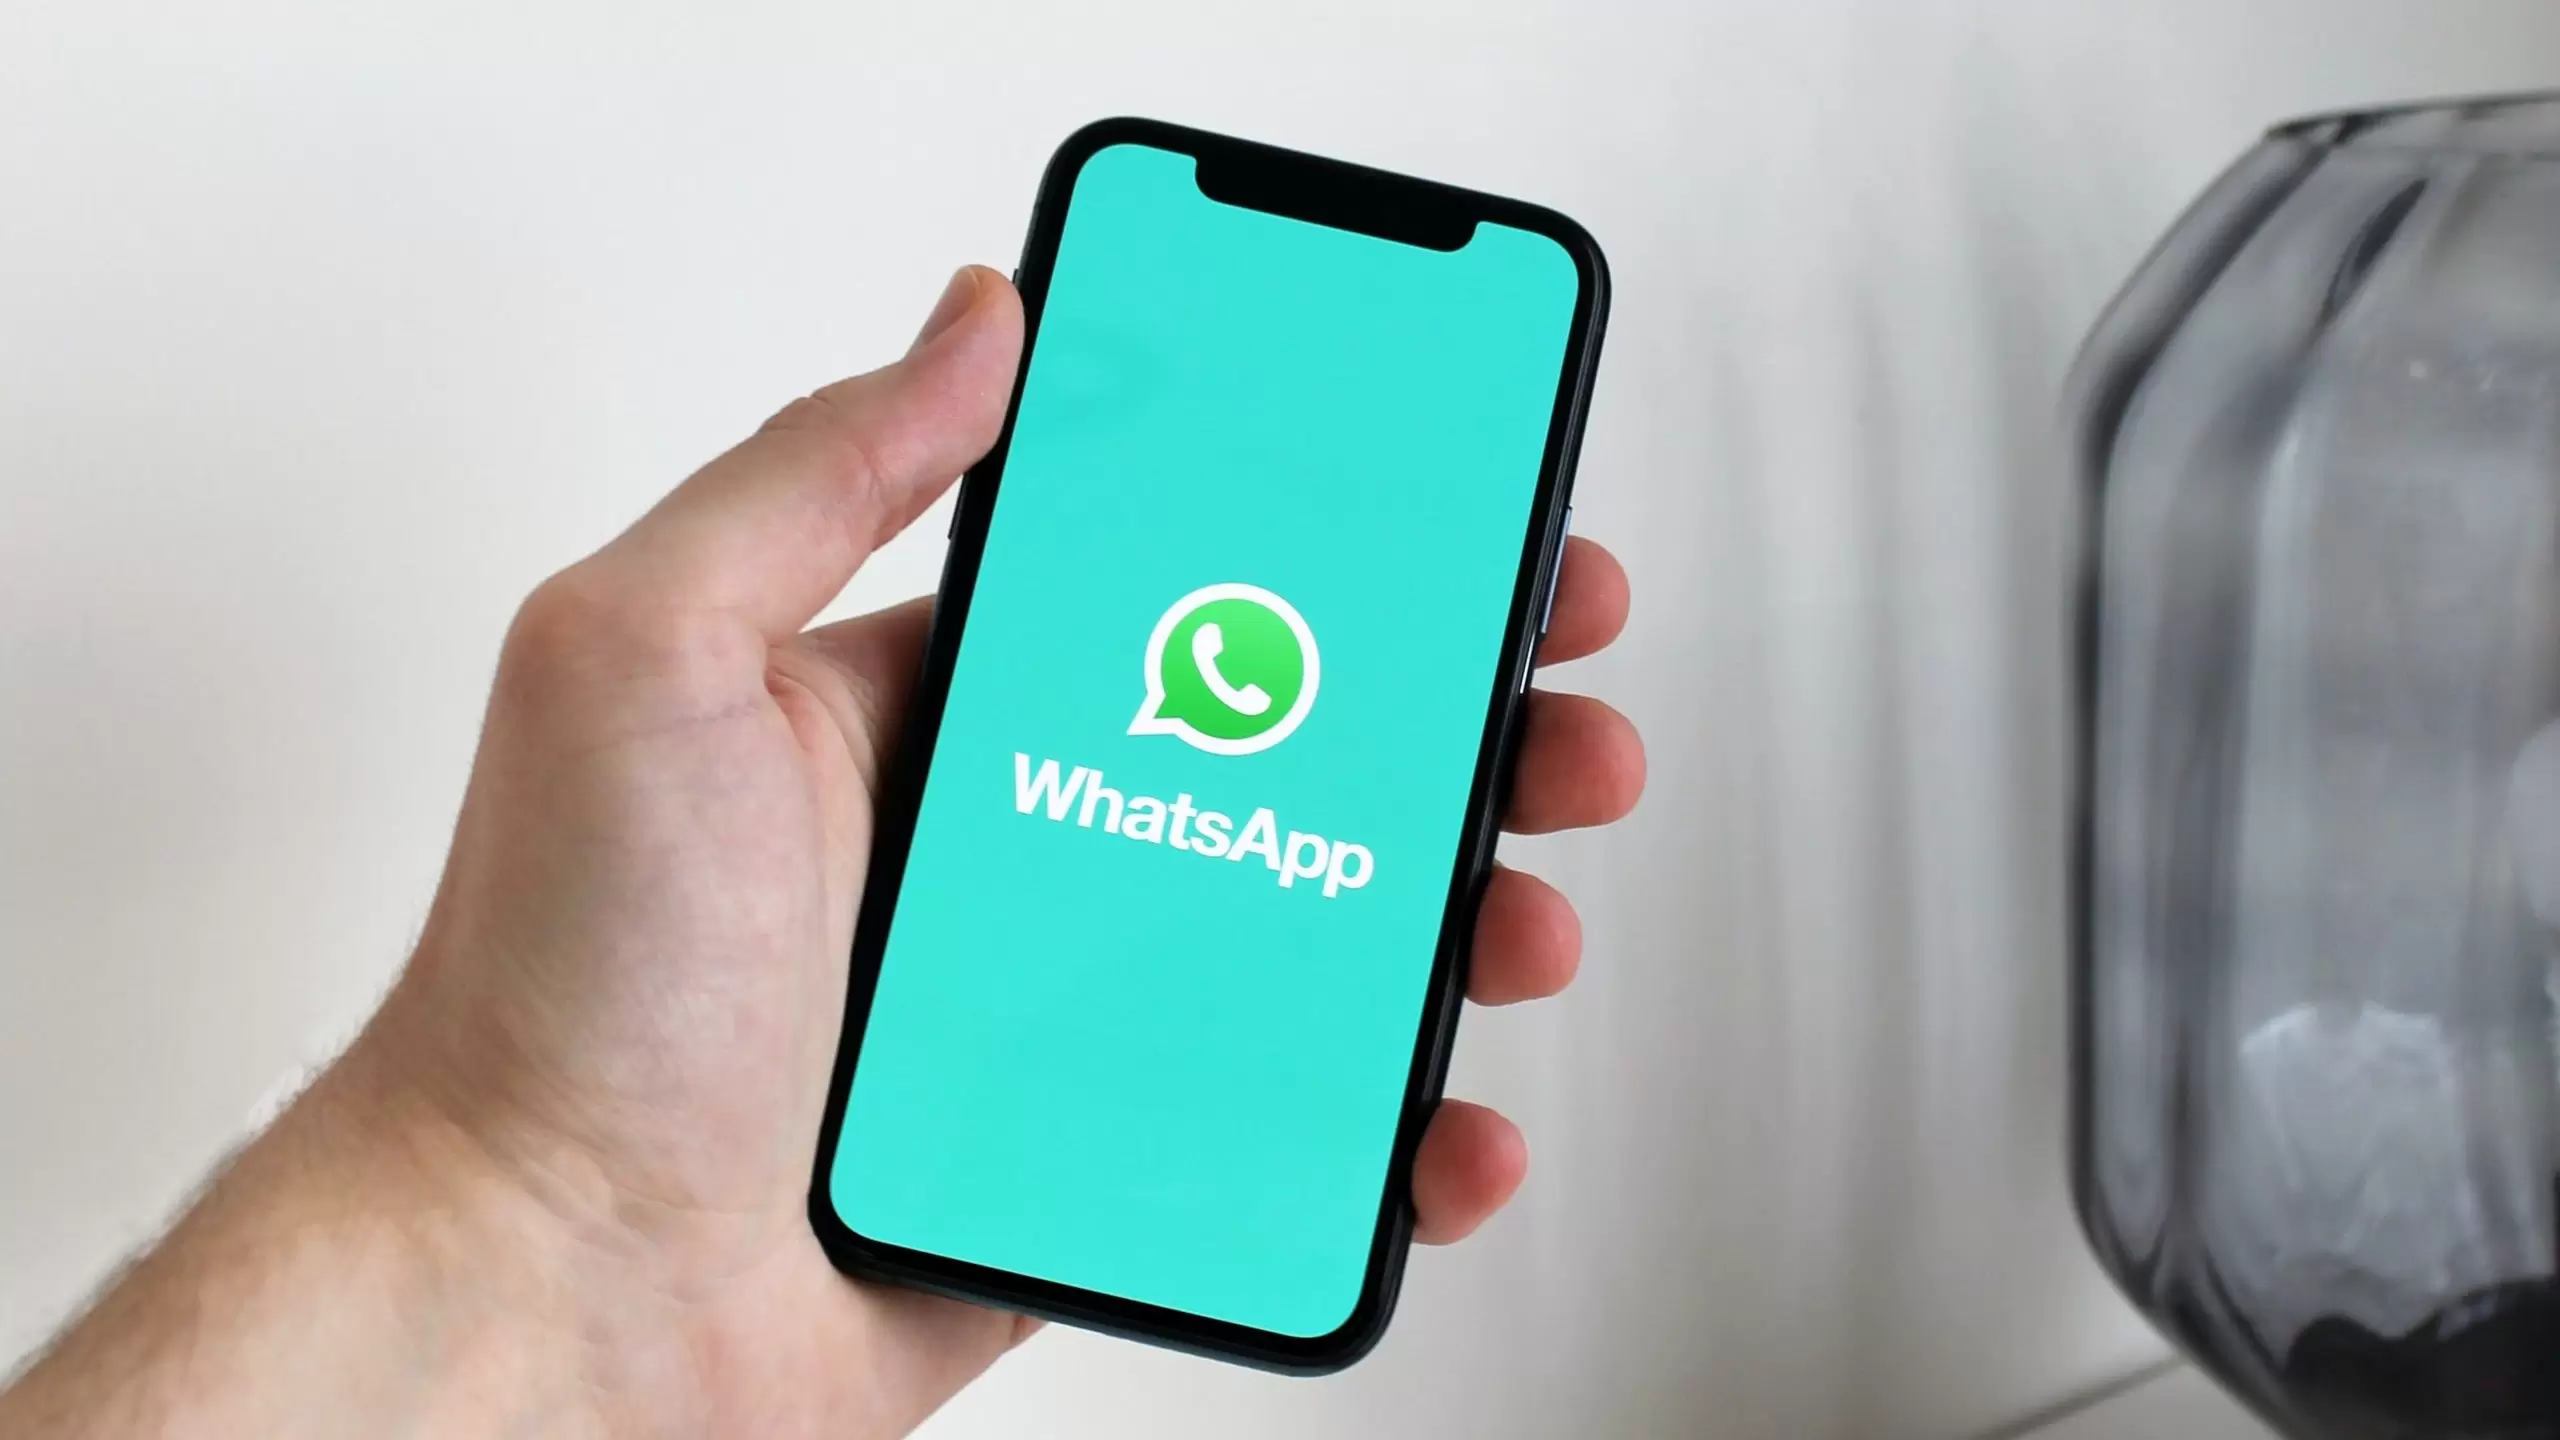 WhatsApp: Will the account of those who do not accept the new terms be blocked?  check out